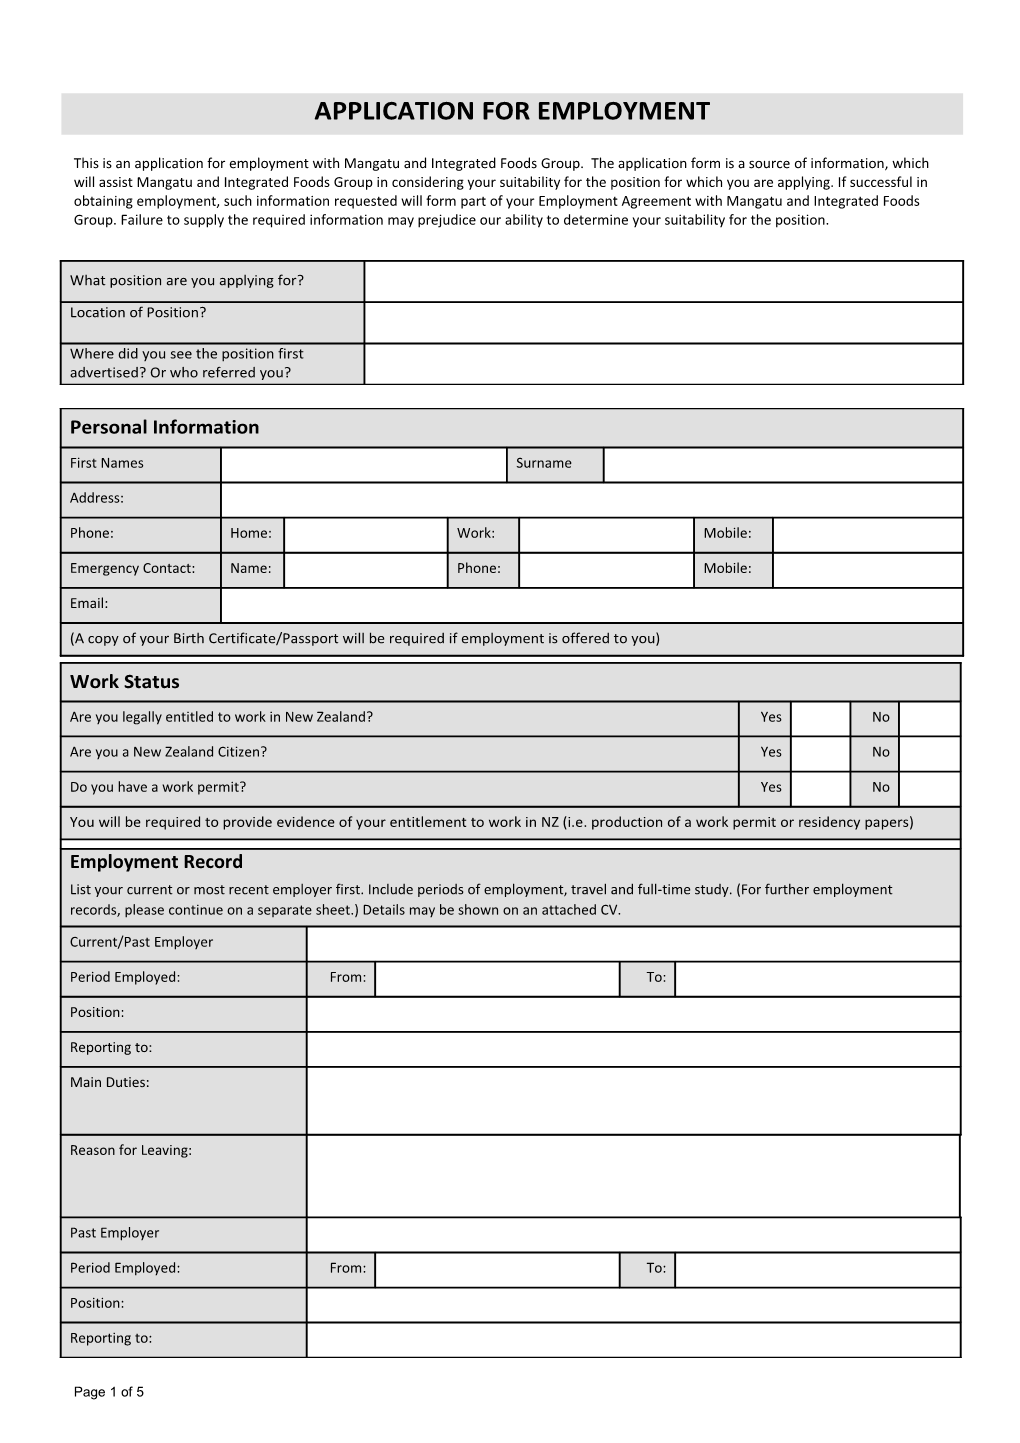 This Is an Application for Employment with Mangatu and Integrated Foods Group. the Application